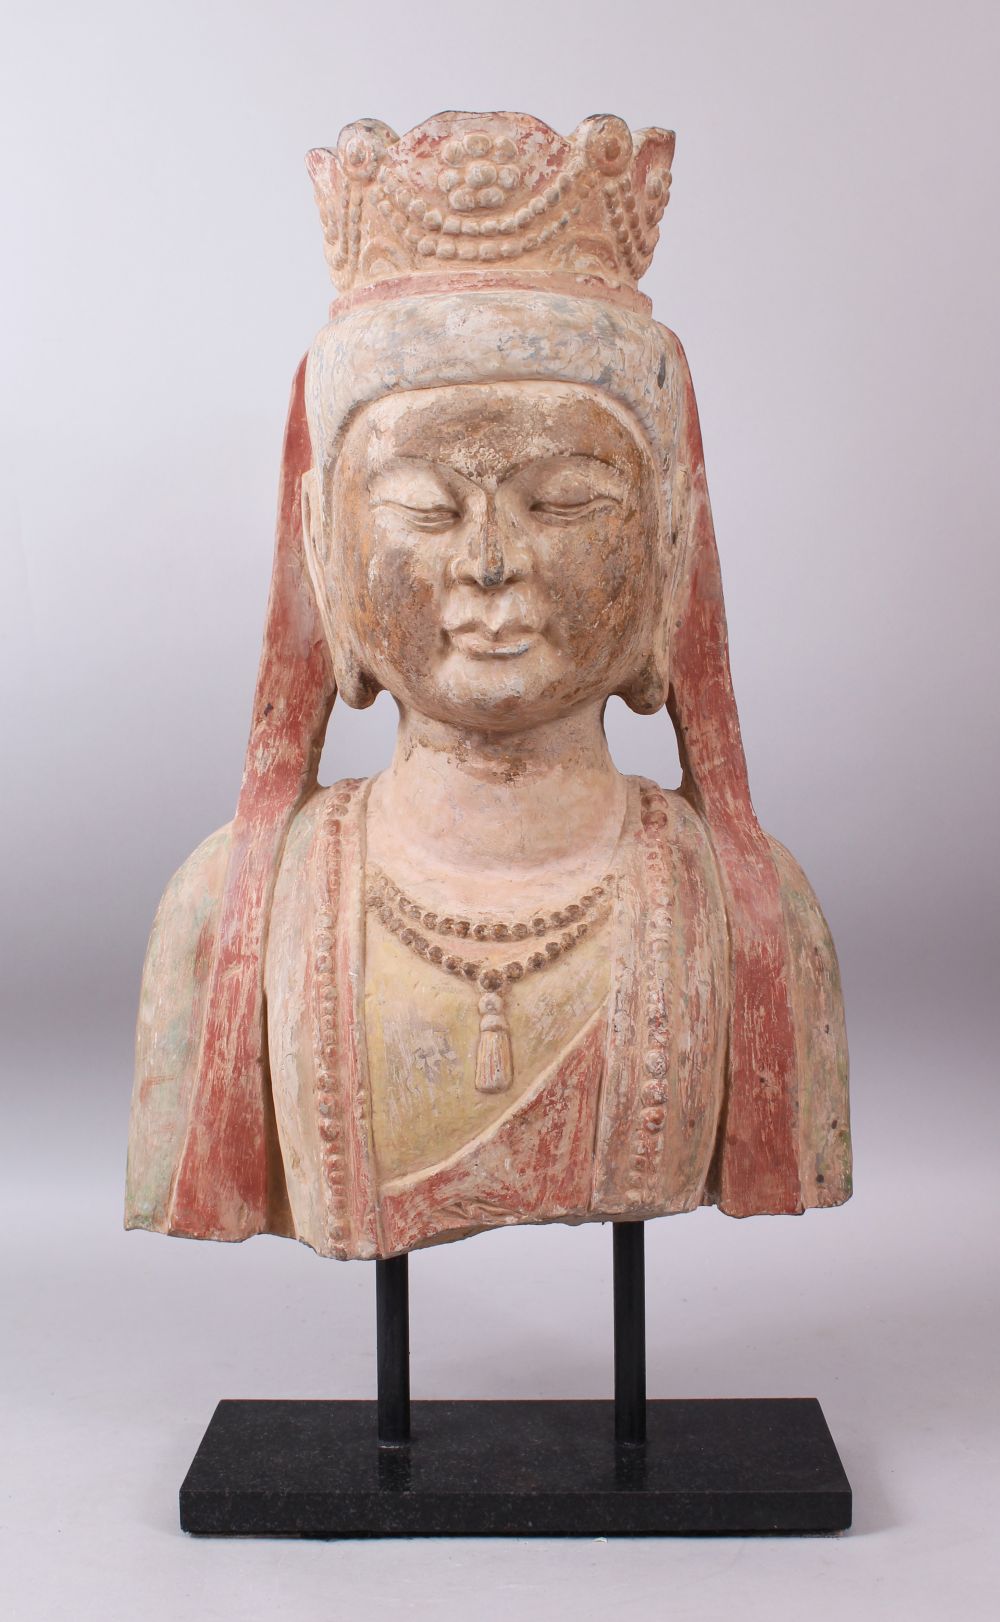 A 19TH / 20TH CENTURY SANDSTONE BUST OF BUDDHA wearing a headdress, with polychrome decoration, on